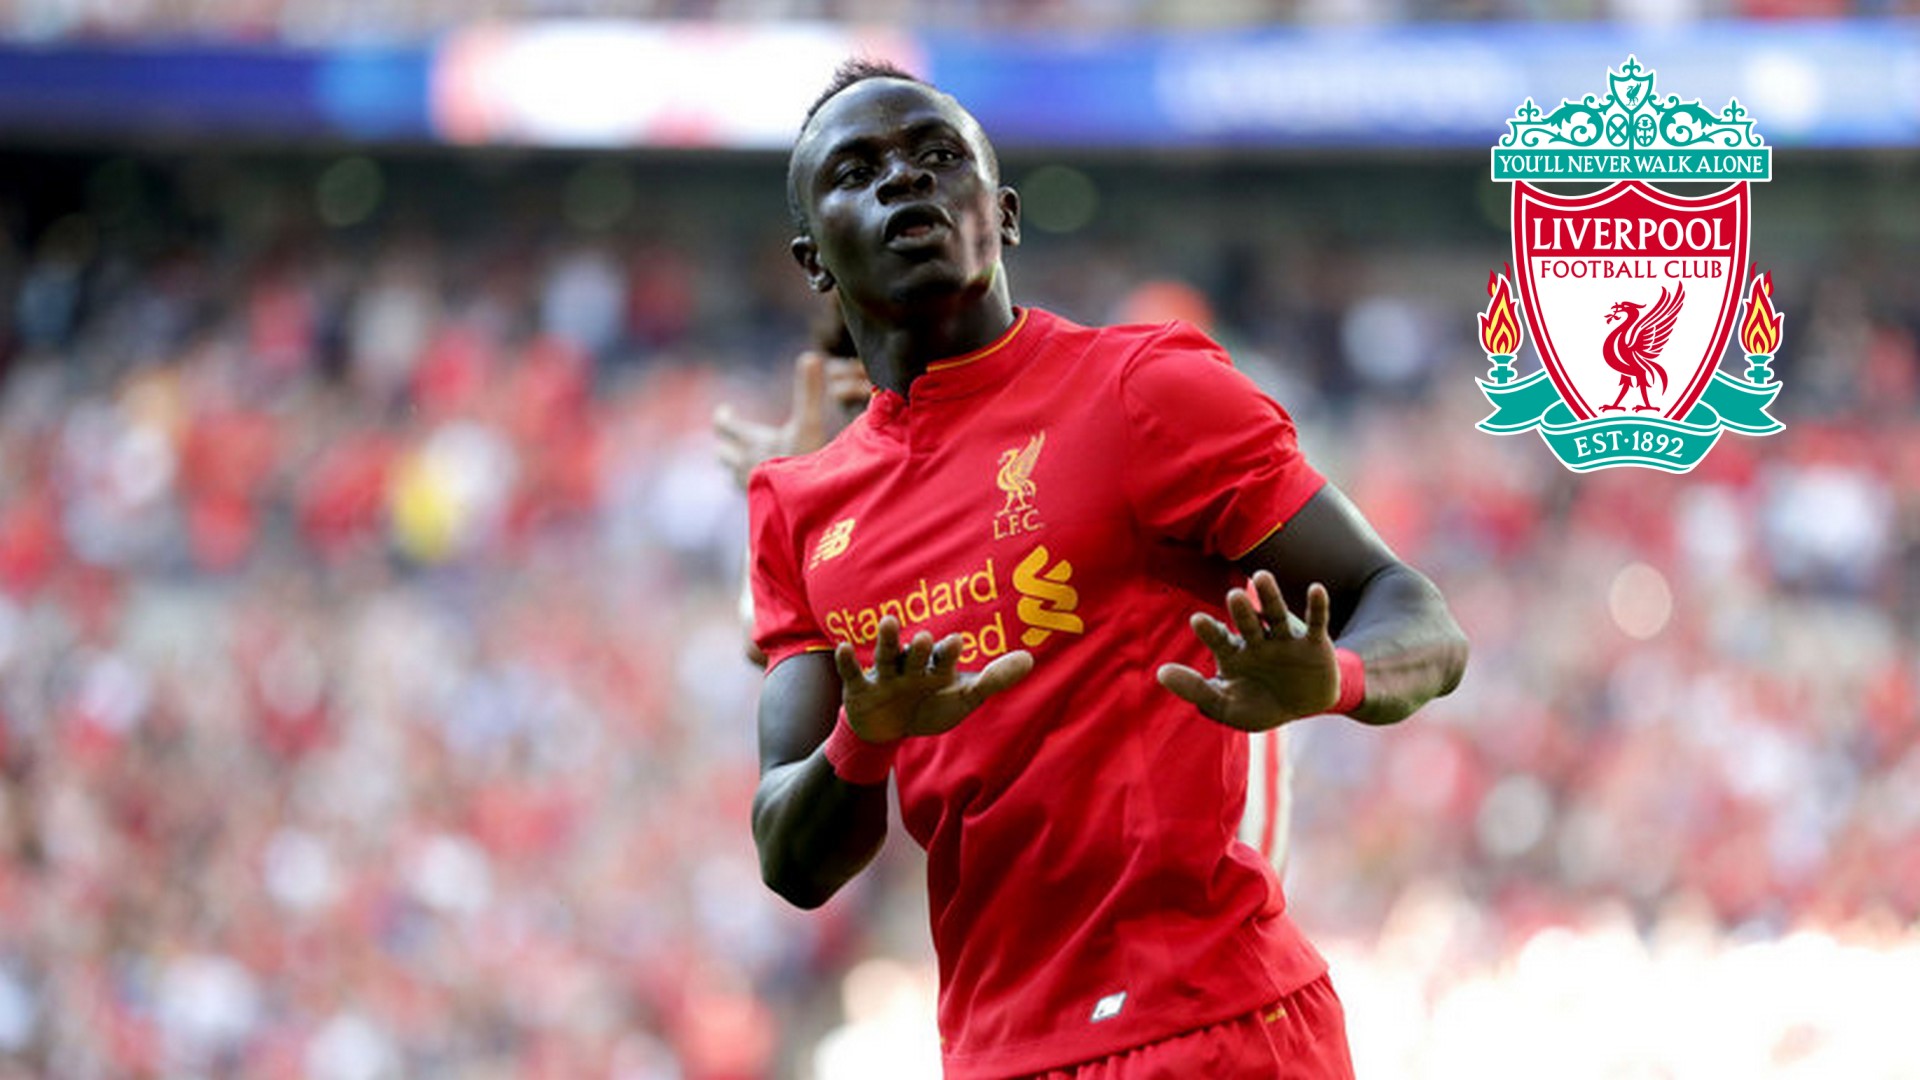 Sadio Mane Wallpaper HD With Resolution 1920X1080 pixel. You can make this wallpaper for your Desktop Computer Backgrounds, Mac Wallpapers, Android Lock screen or iPhone Screensavers